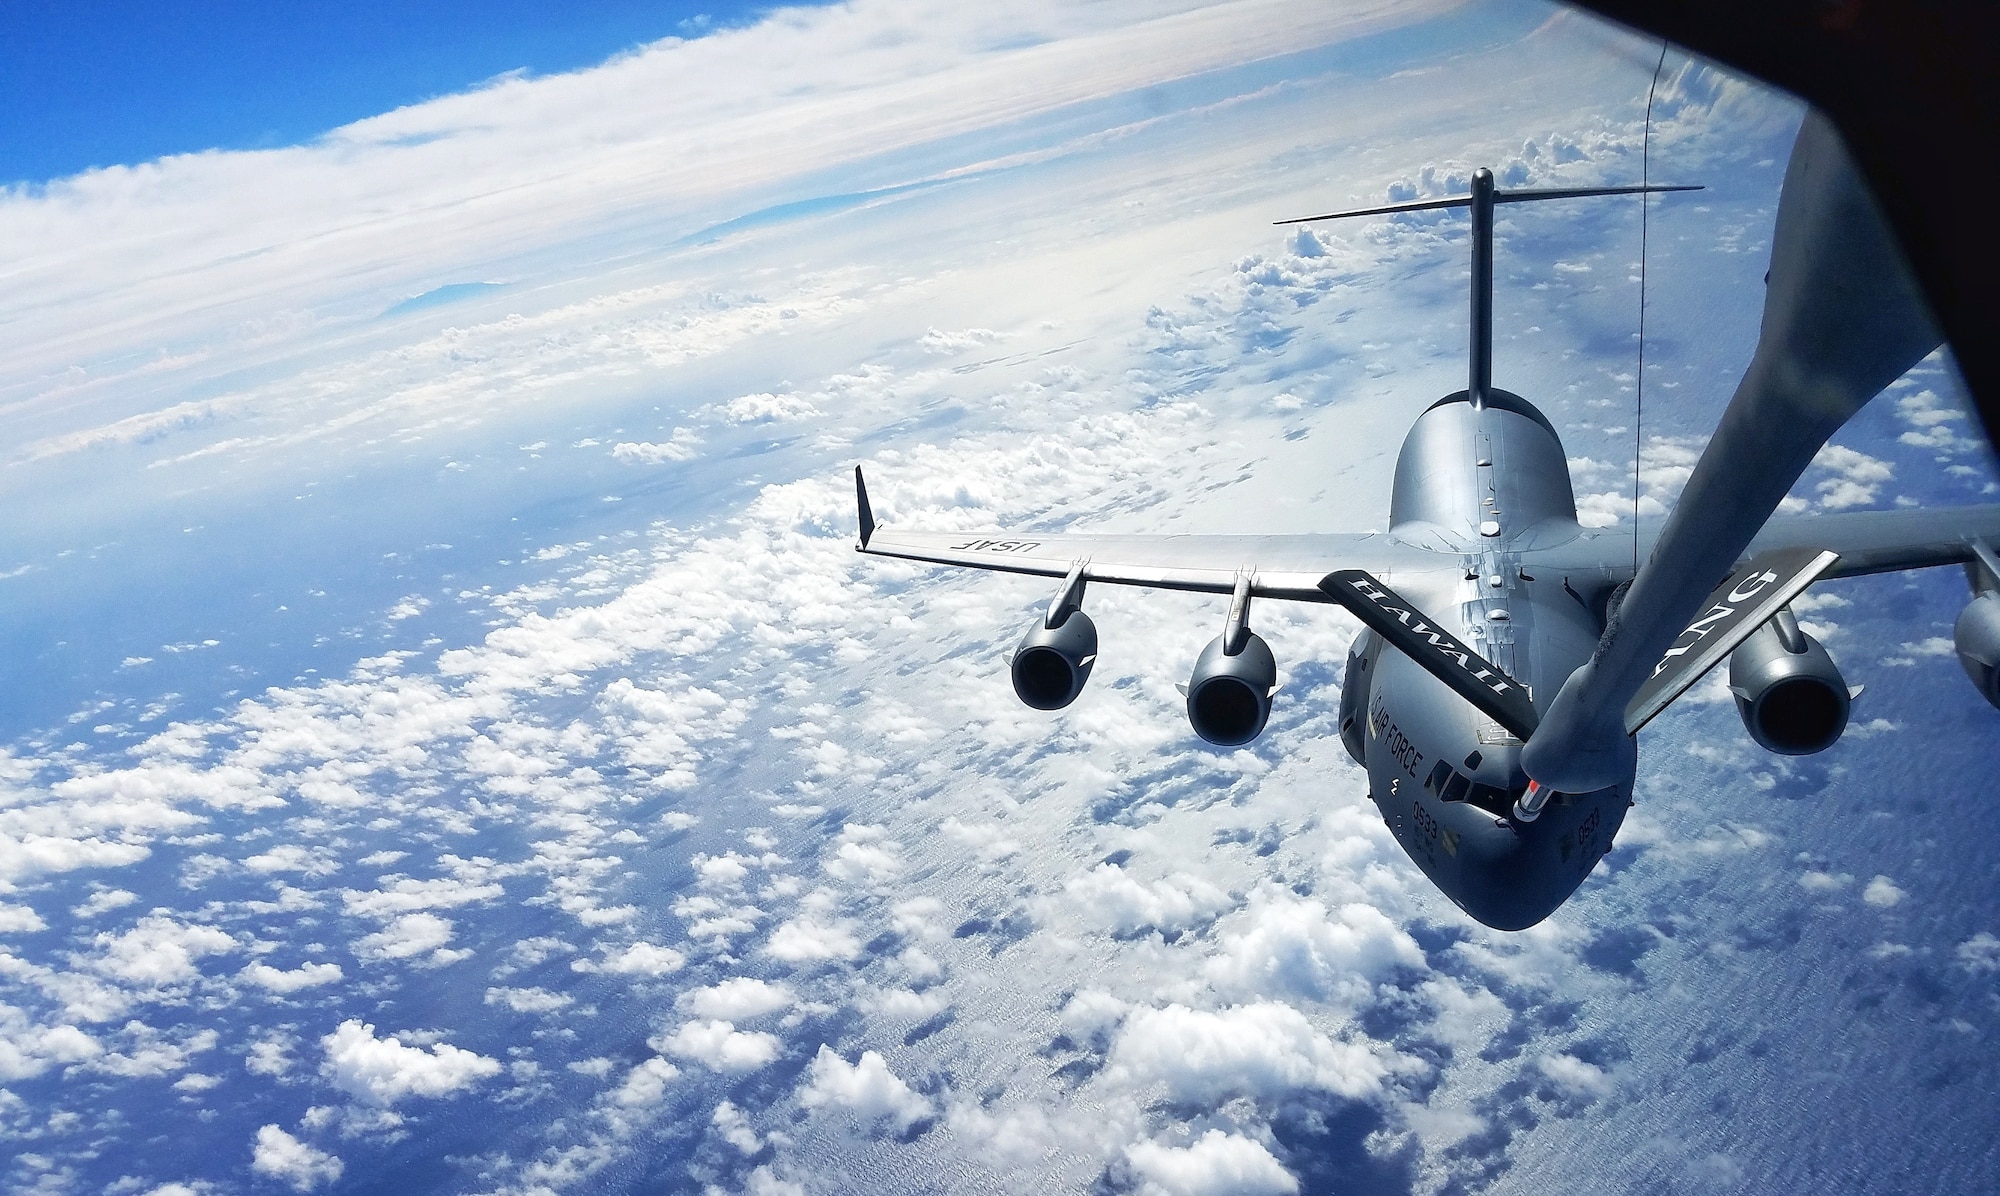 535th Airlift Squadron C-17 Globemaster III, assigned to Joint Base Pearl Harbor-Hickam, HI, receives aerial refueling from 203rd Air Refueling Squadron KC-135 Stratotanker during a local training flight around the islands of Hawaii on February 14, 2018. (U.S. Air Force Photo by Senior Airman Michael Reeves Jr.)